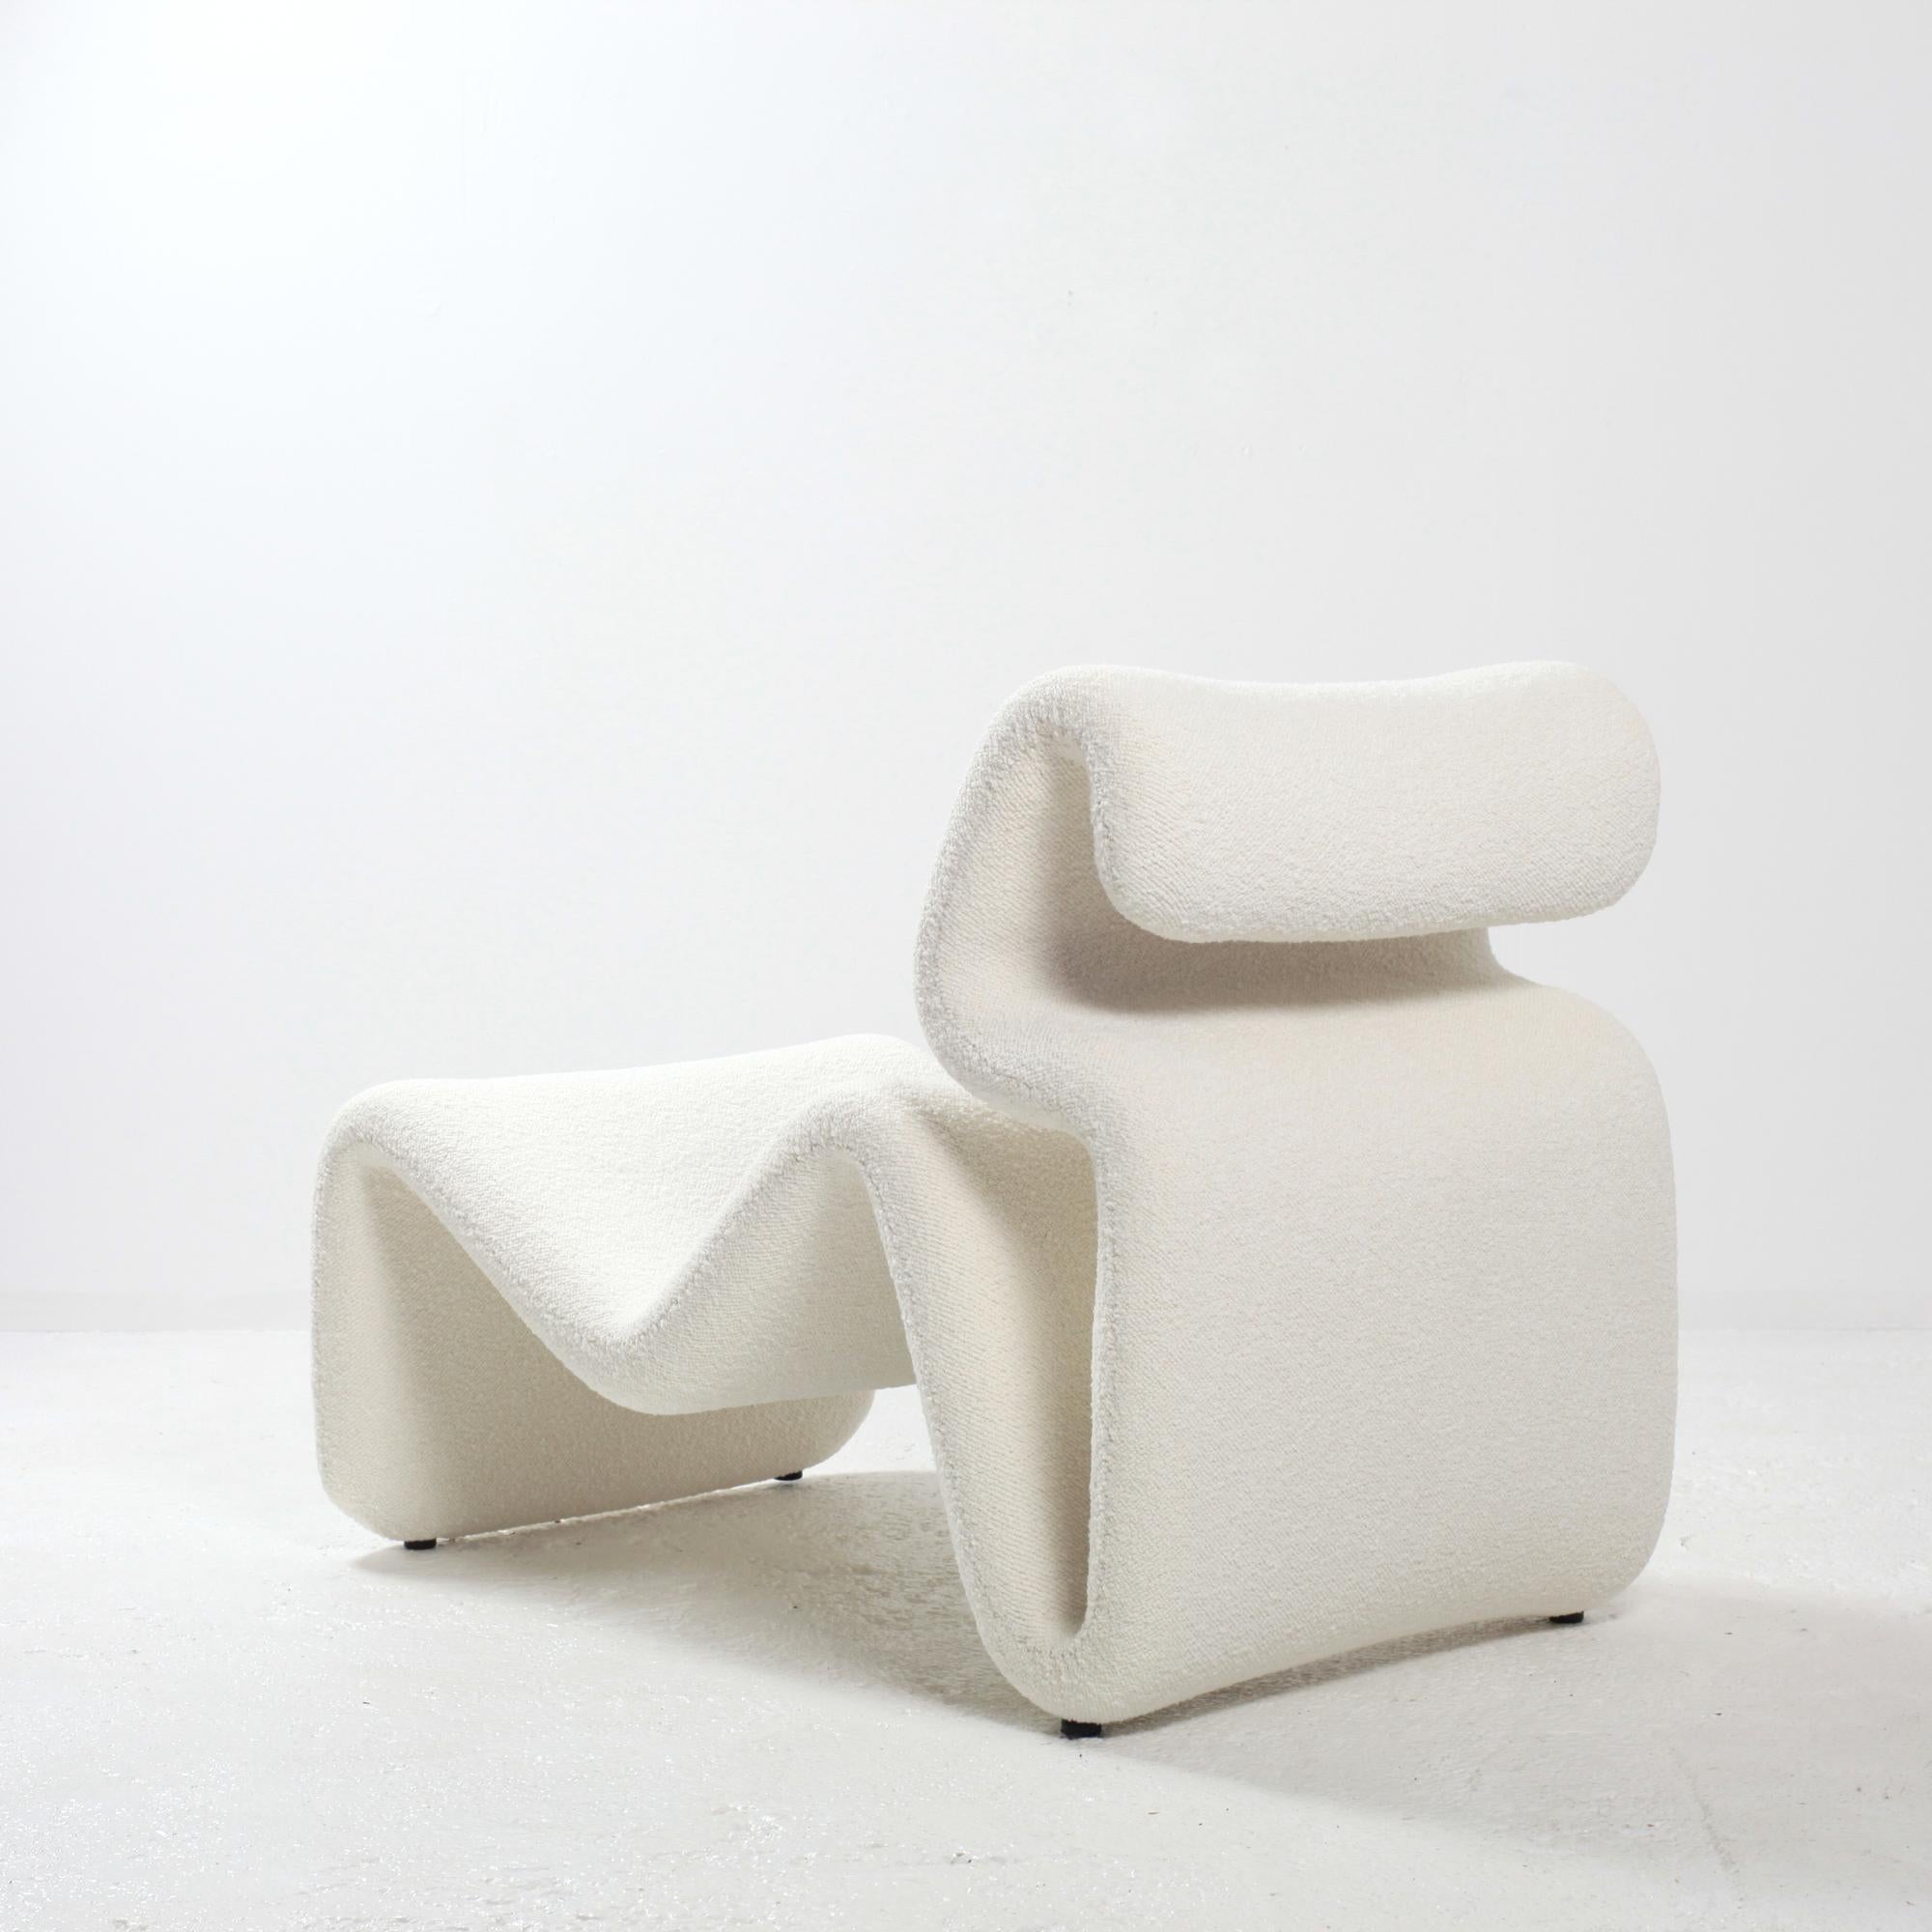 Late 20th Century Etcetera Lounge Chair With Footstool by Jan Ekselius for JOC Sweden 1970s